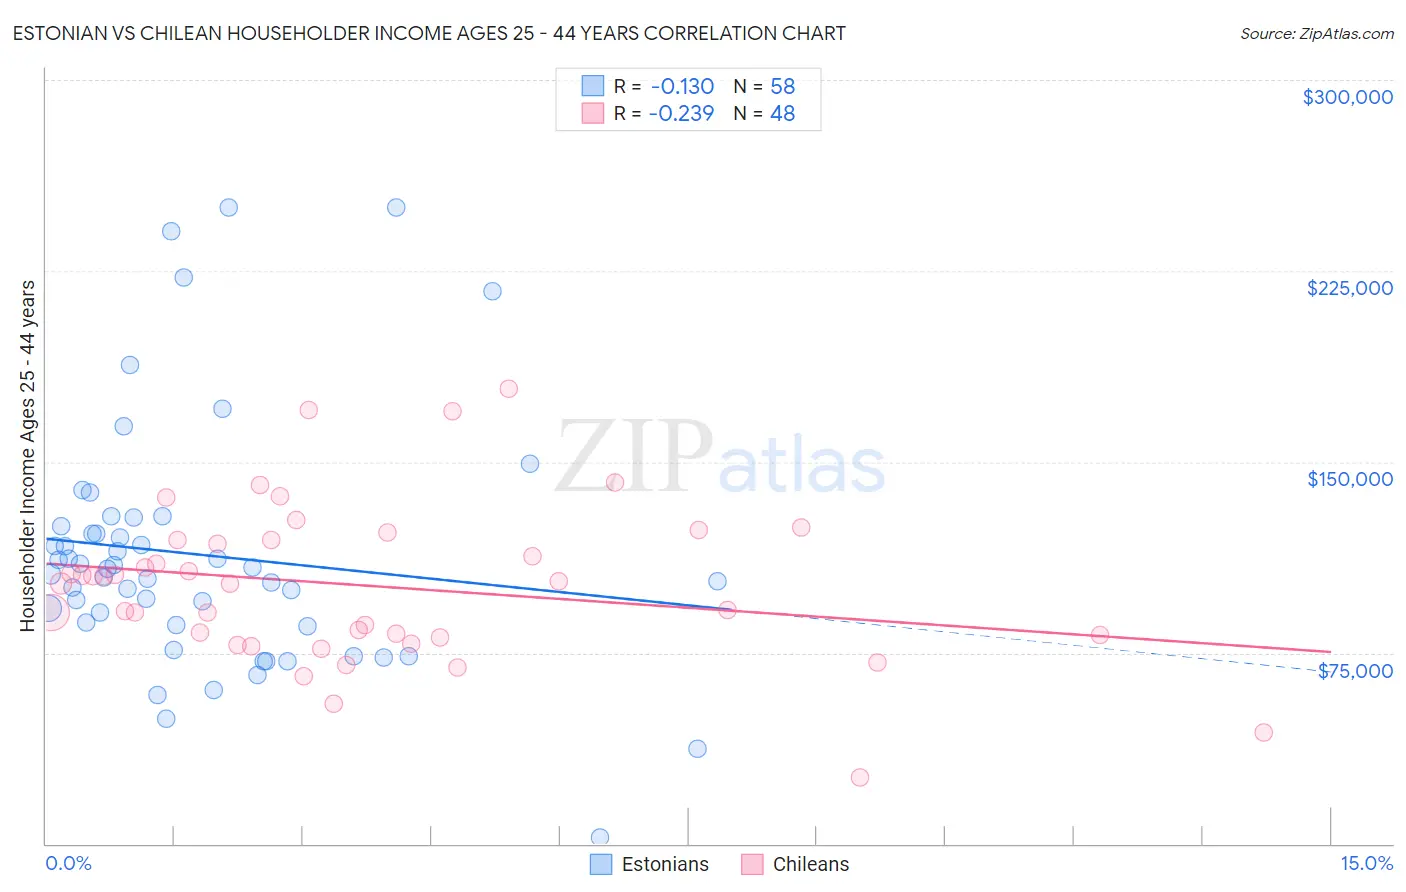 Estonian vs Chilean Householder Income Ages 25 - 44 years